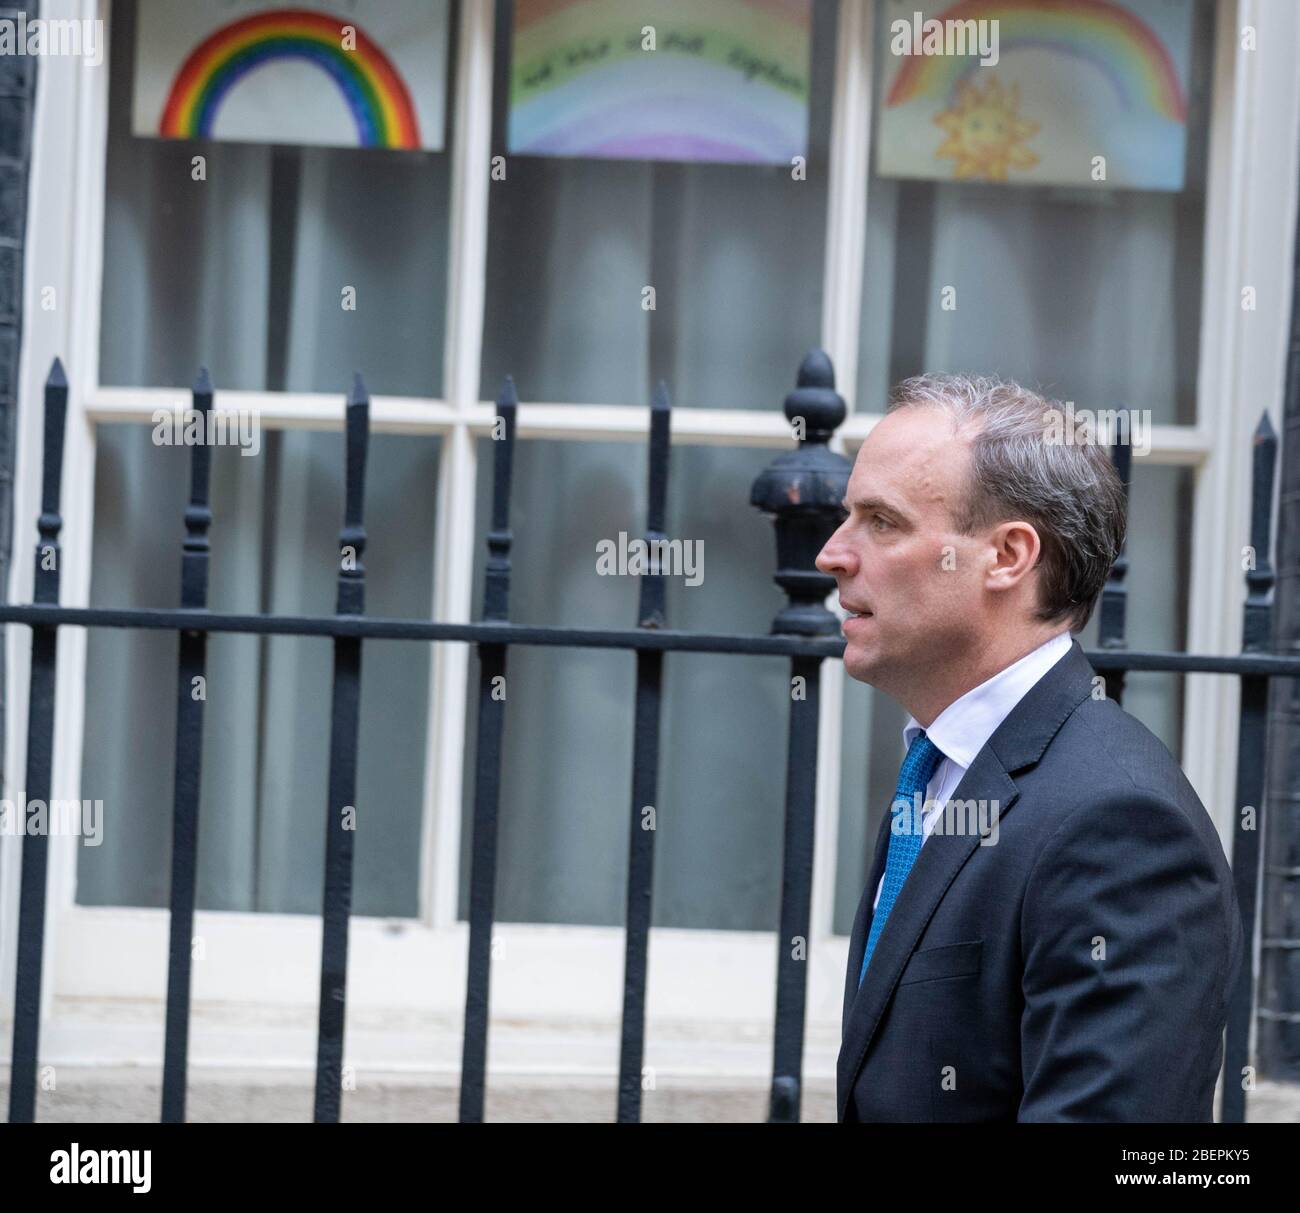 Londres, Royaume-Uni. 15 avril 2020. Dominic Raab MP PC Foreign Secretary 10 Downing Street, Londres UK Credit: Ian Davidson/Alay Live News Banque D'Images